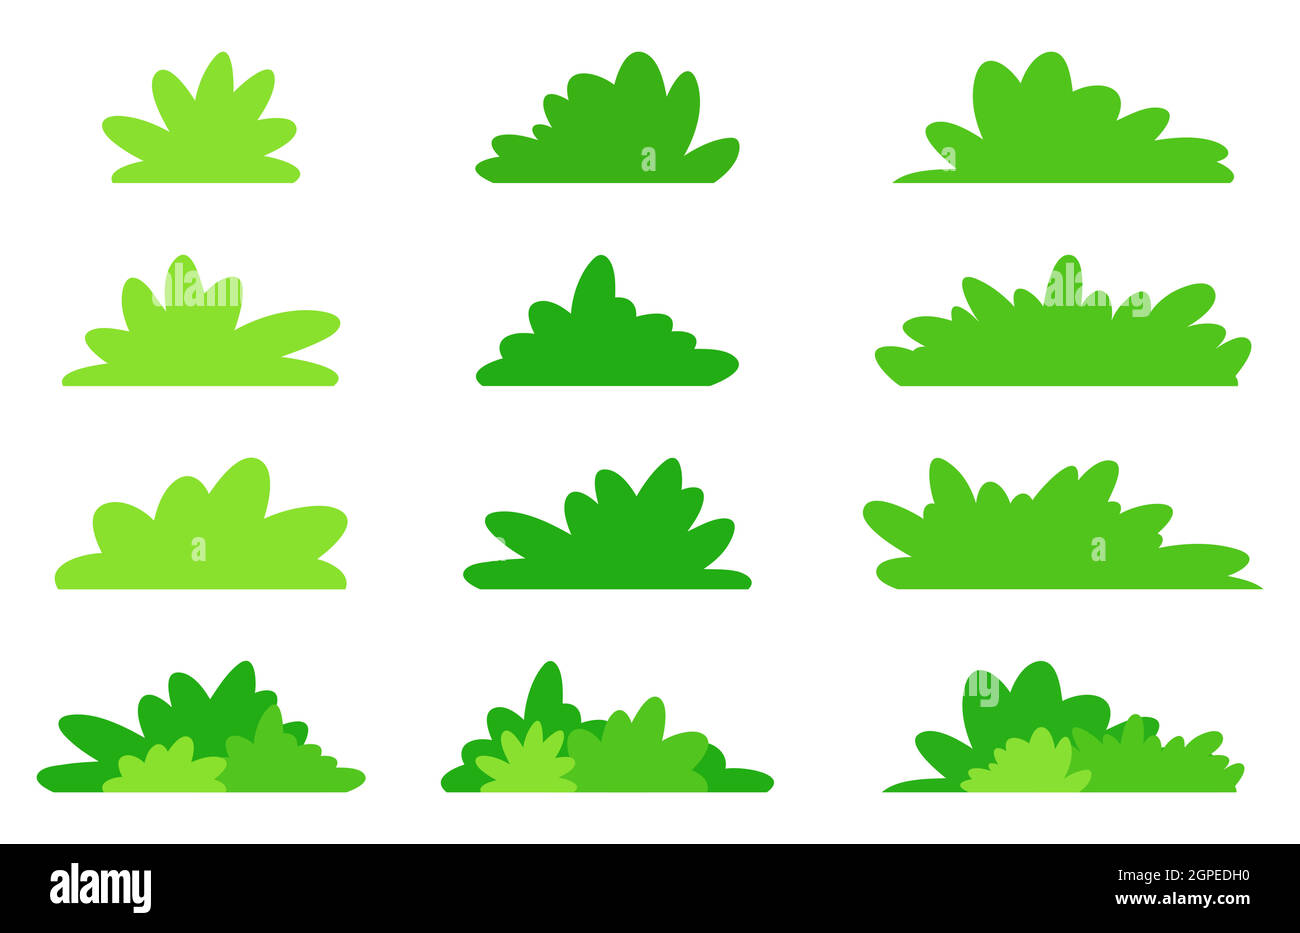 Simple bush set in green color. Flat vector design in minimalistic cartoon style. Garden bushes collection isolated on white background. Stock Vector